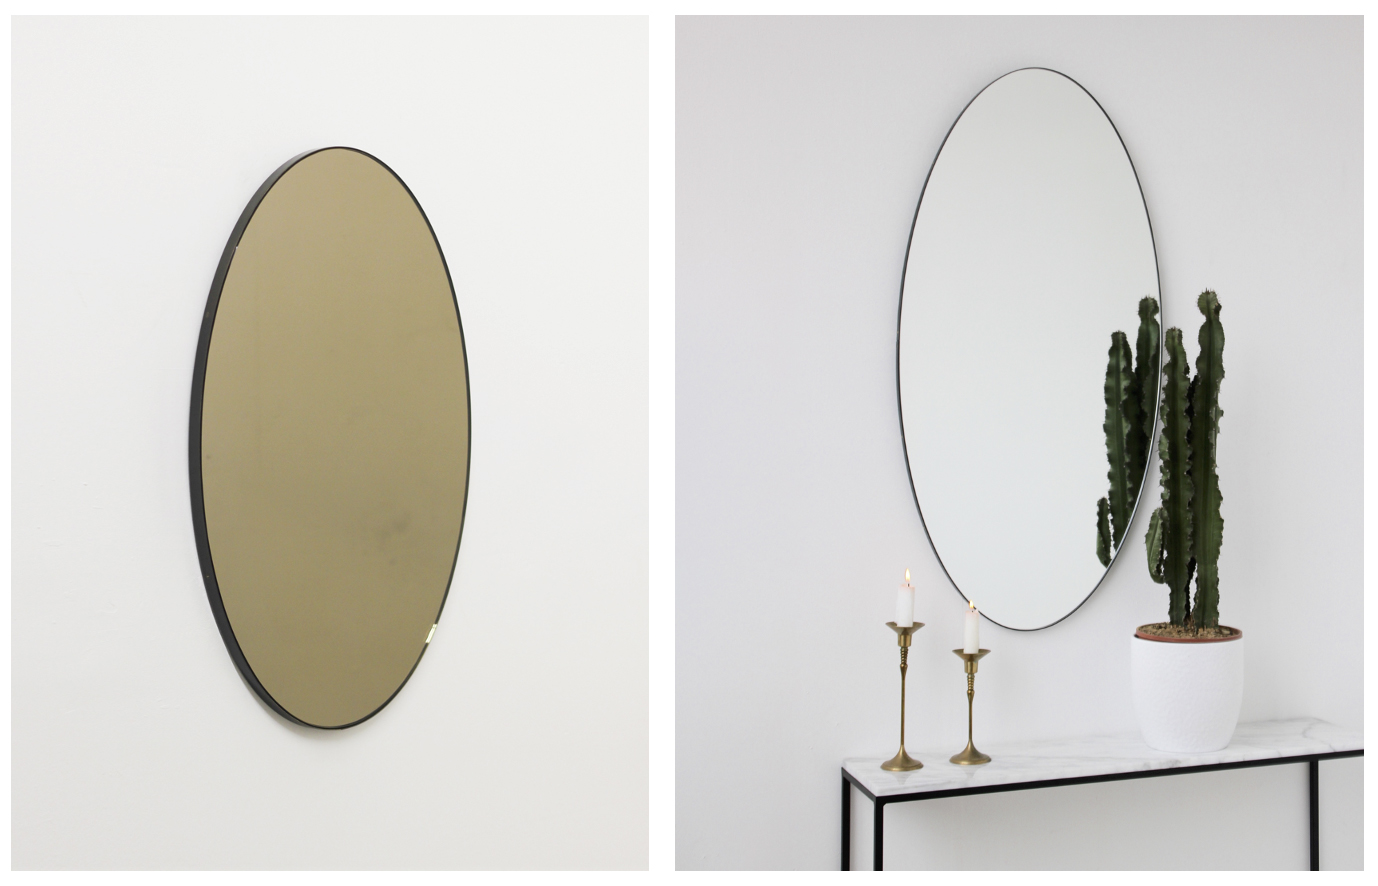 Alguacil & Perkoff Handcrafted Oval Mirror